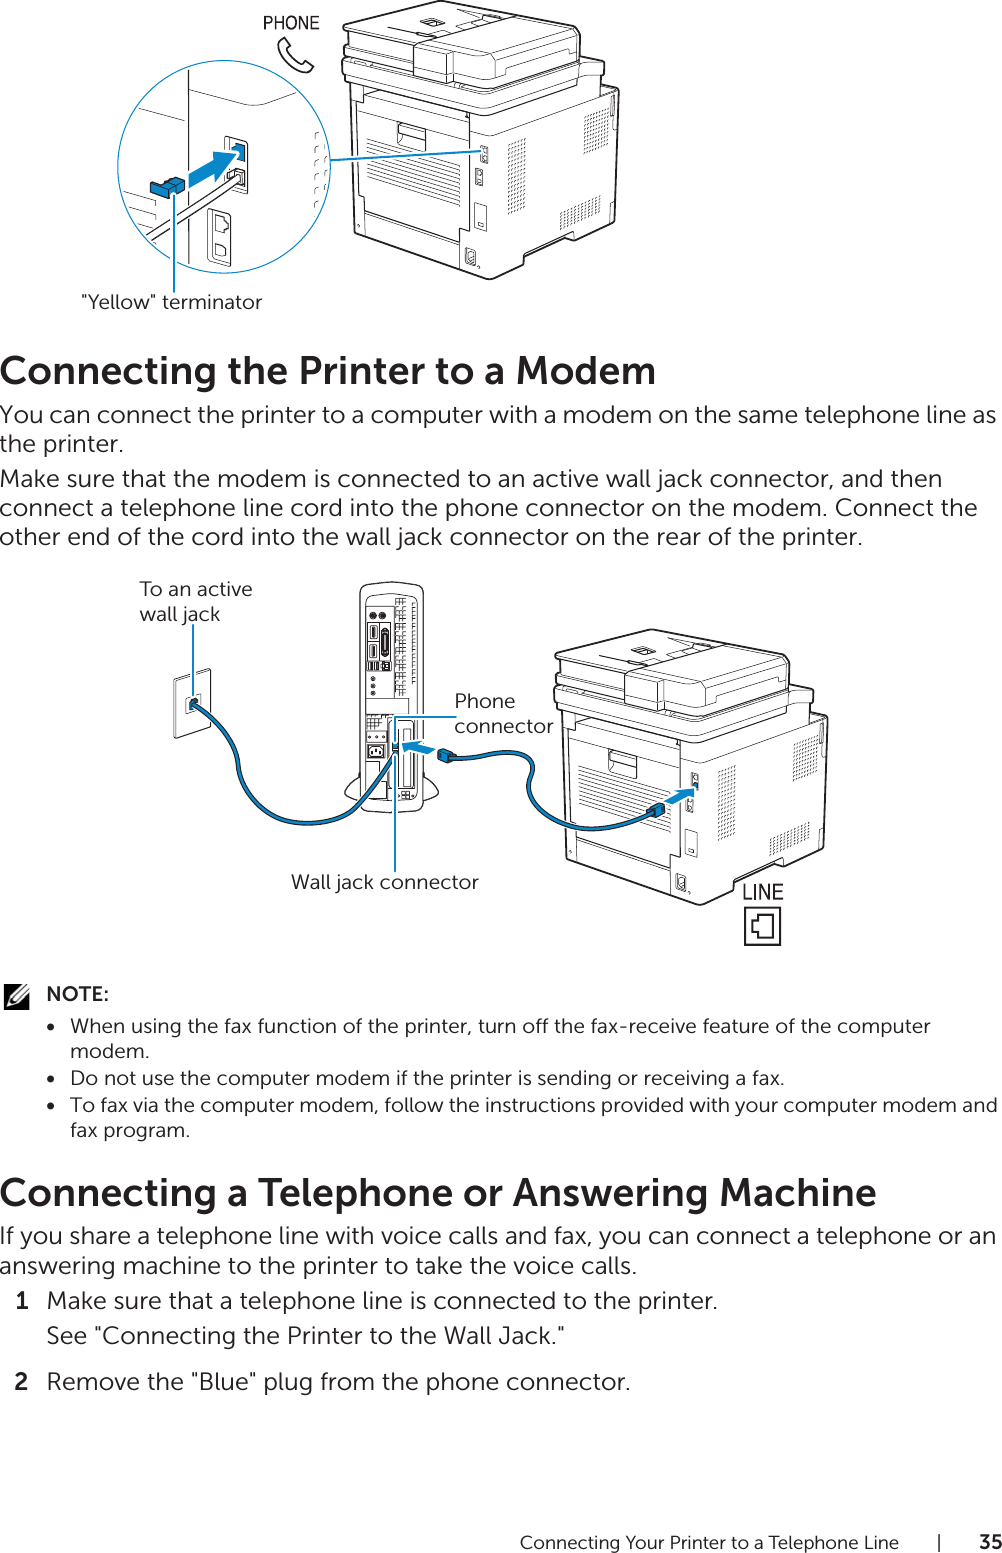 Connecting Your Printer to a Telephone Line |35Connecting the Printer to a ModemYou can connect the printer to a computer with a modem on the same telephone line as the printer.Make sure that the modem is connected to an active wall jack connector, and then connect a telephone line cord into the phone connector on the modem. Connect the other end of the cord into the wall jack connector on the rear of the printer.NOTE:•When using the fax function of the printer, turn off the fax-receive feature of the computer modem.•Do not use the computer modem if the printer is sending or receiving a fax.•To fax via the computer modem, follow the instructions provided with your computer modem and fax program.Connecting a Telephone or Answering MachineIf you share a telephone line with voice calls and fax, you can connect a telephone or an answering machine to the printer to take the voice calls.1Make sure that a telephone line is connected to the printer.See &quot;Connecting the Printer to the Wall Jack.&quot;2Remove the &quot;Blue&quot; plug from the phone connector.&quot;Yellow&quot; terminatorPhone connectorTo an active wall jackWall jack connector